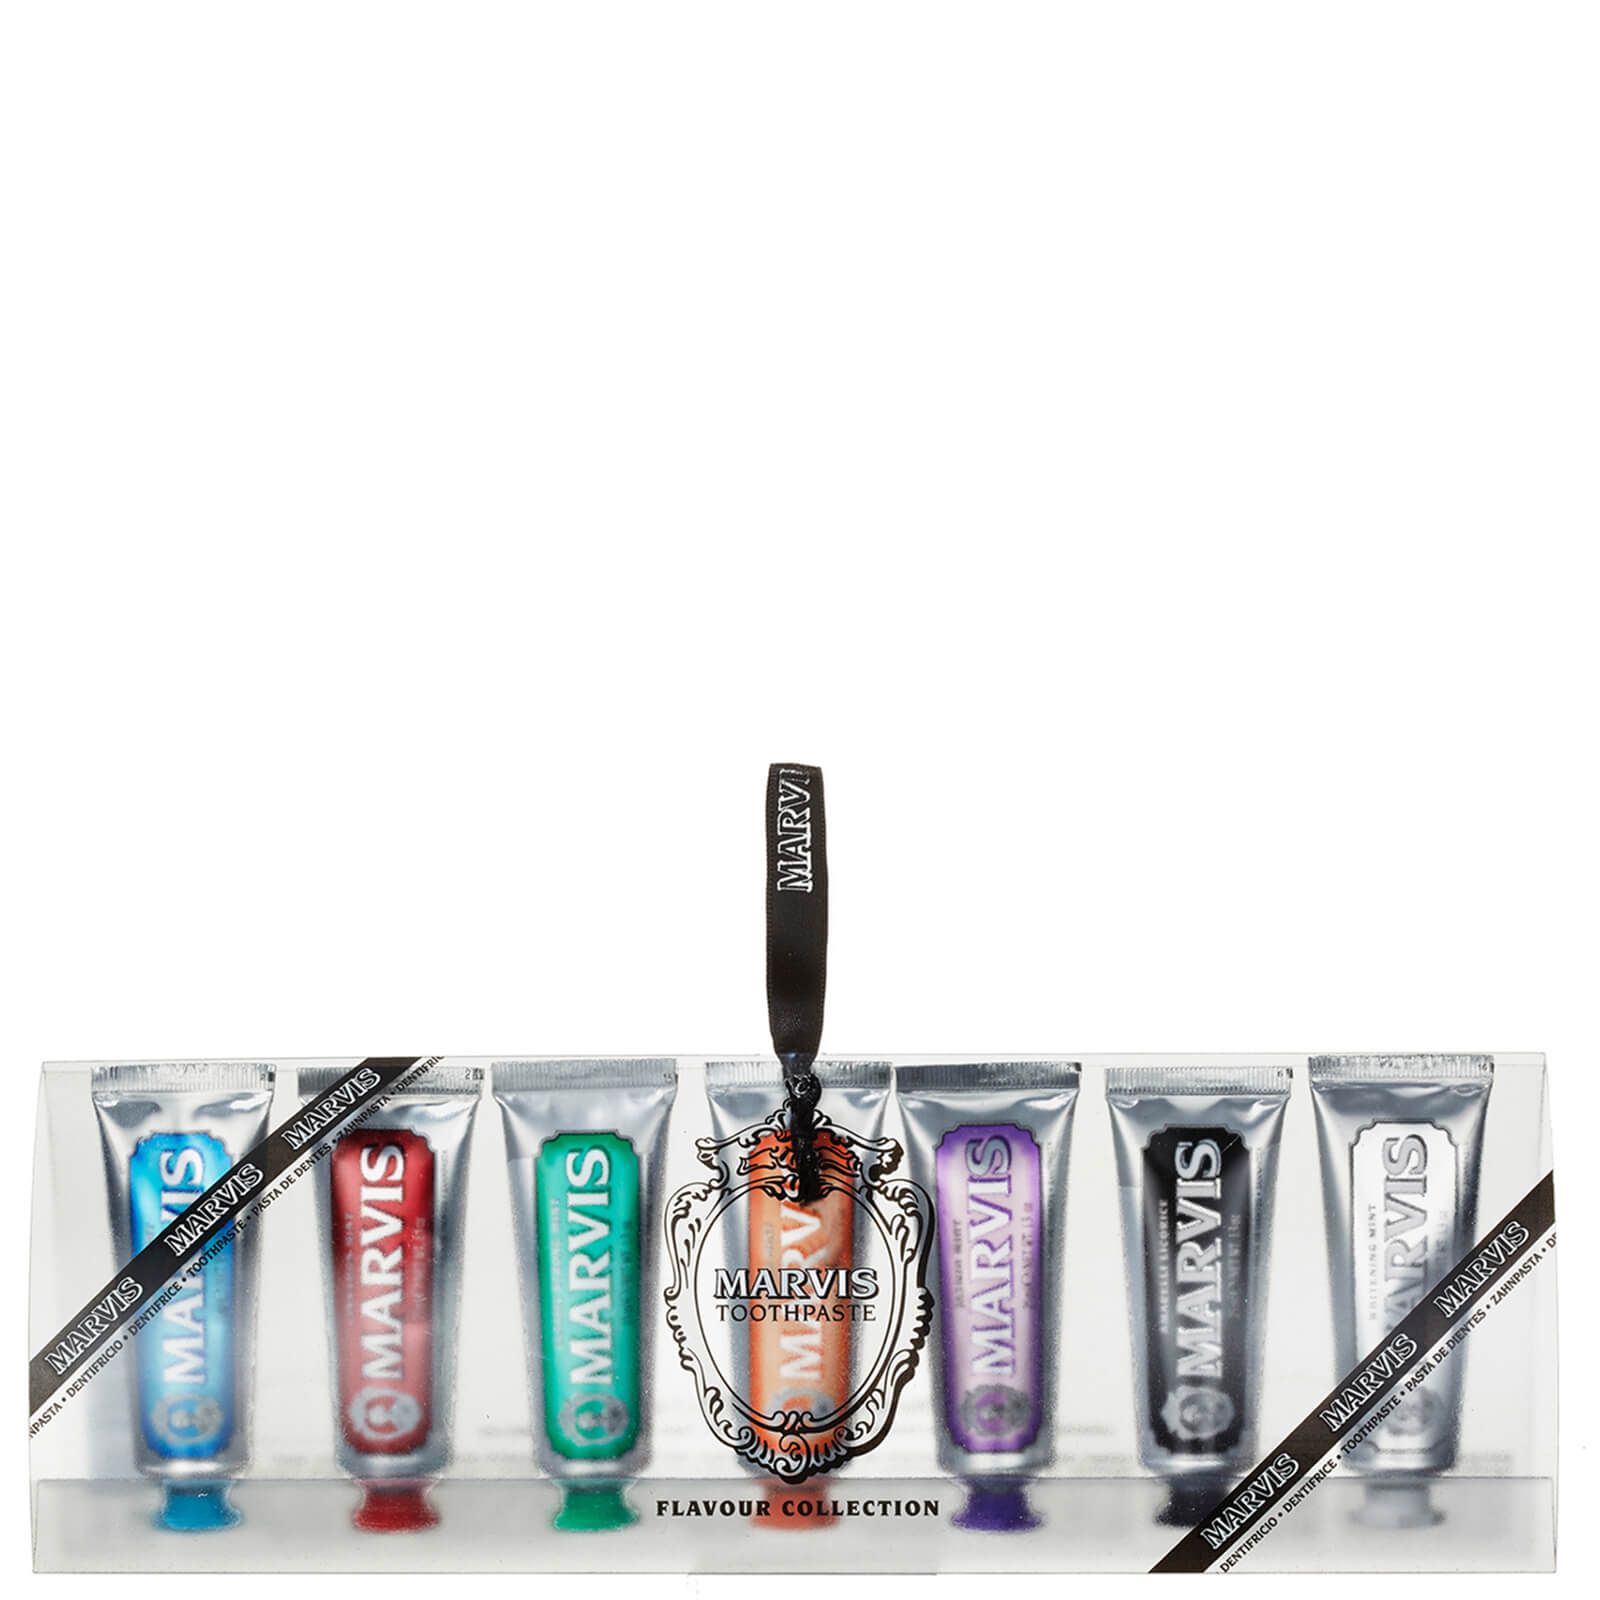 Marvis Toothpaste Flavour Collection lookfantastic.com imagine